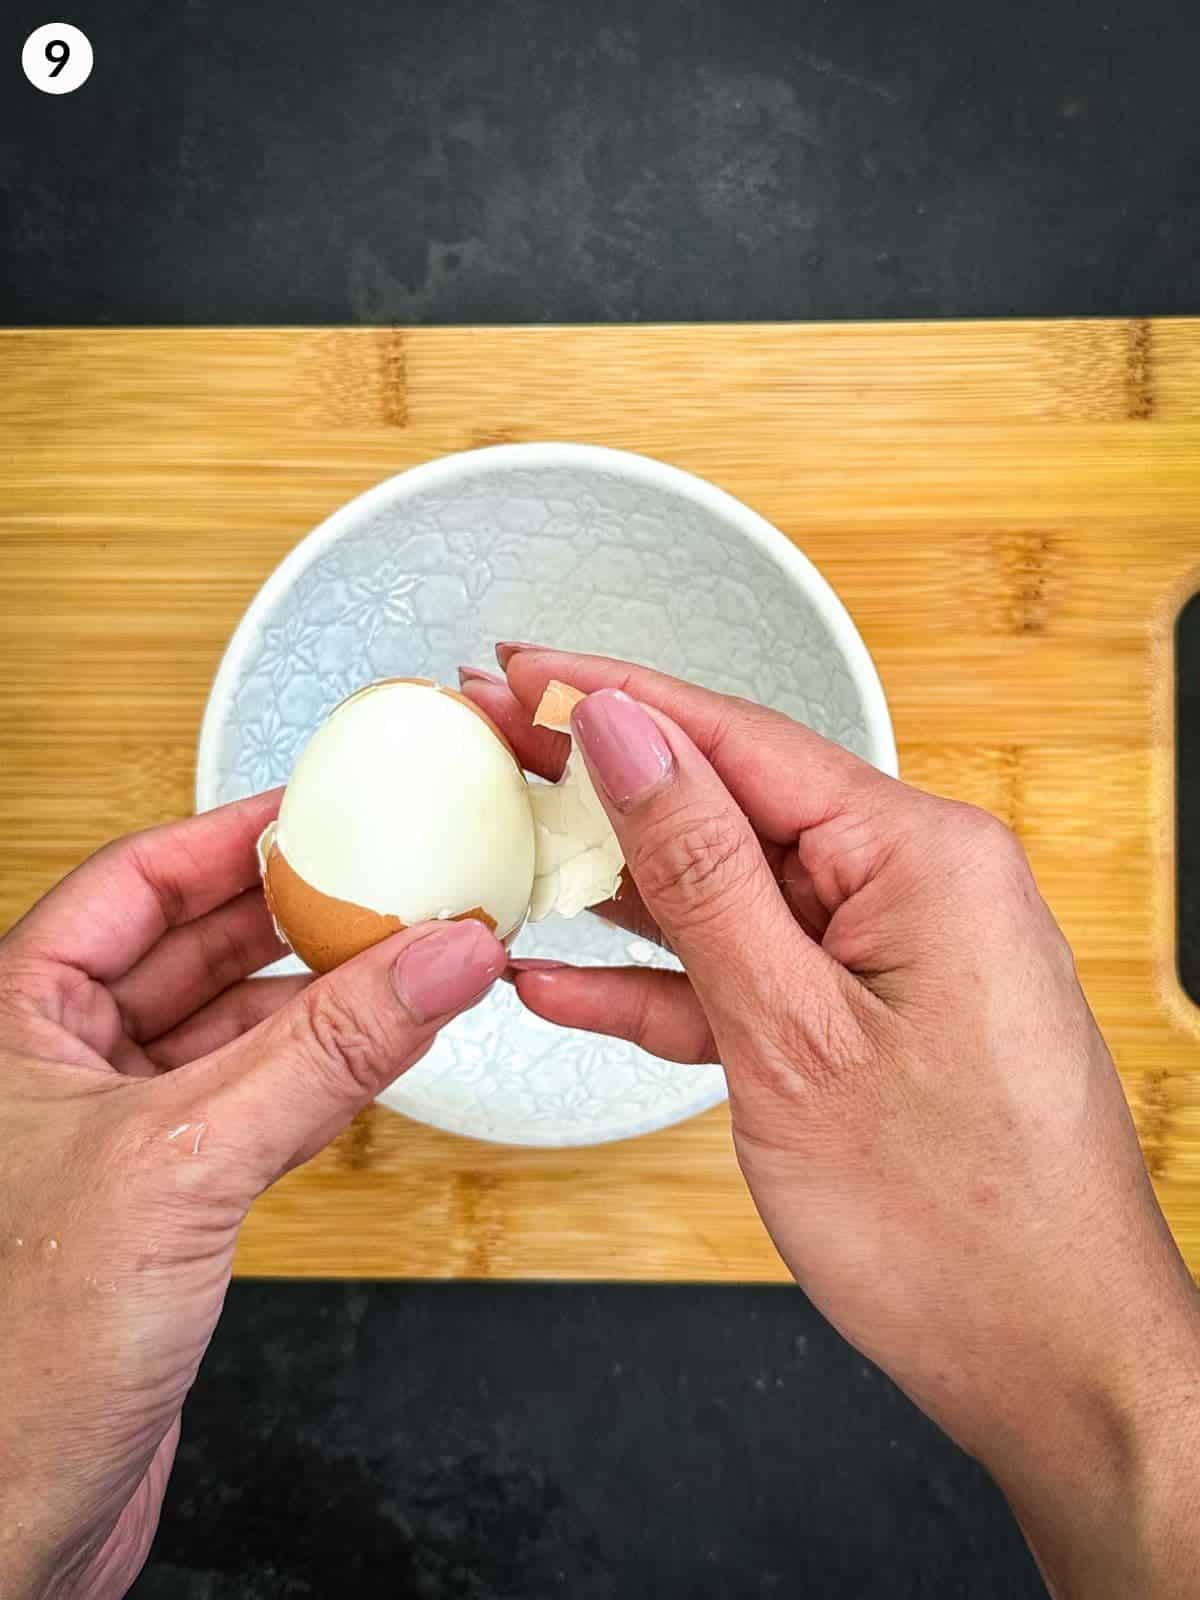 Peeling hard boil egg into a white bowl on a wooden chopping board